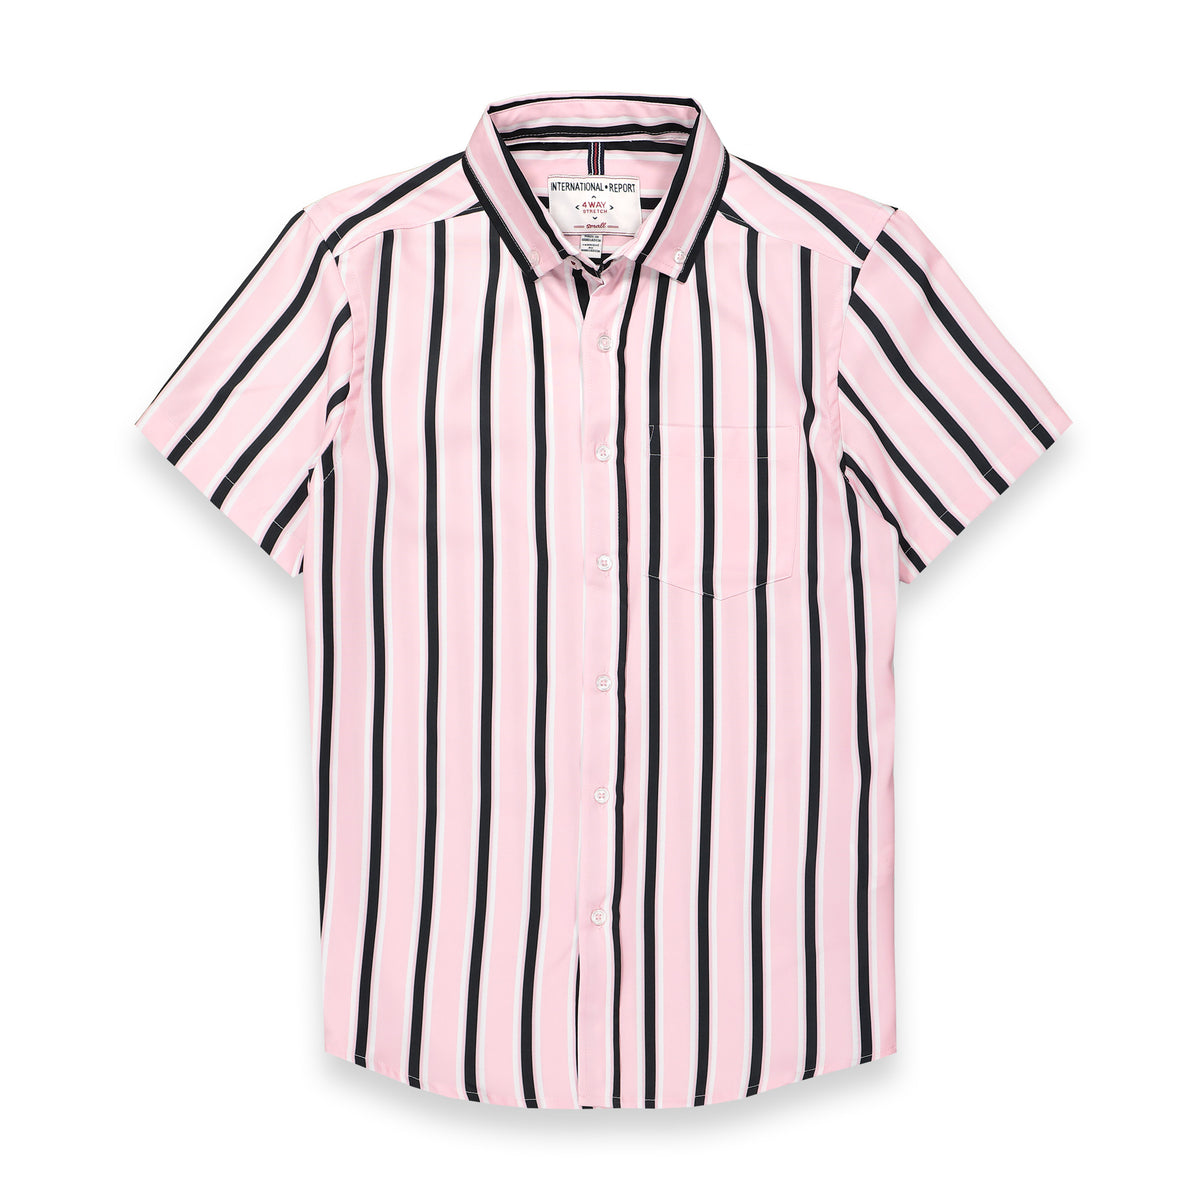 Front View of Short Sleeve 4-Way Stretch Shirt with Stripes in Pink